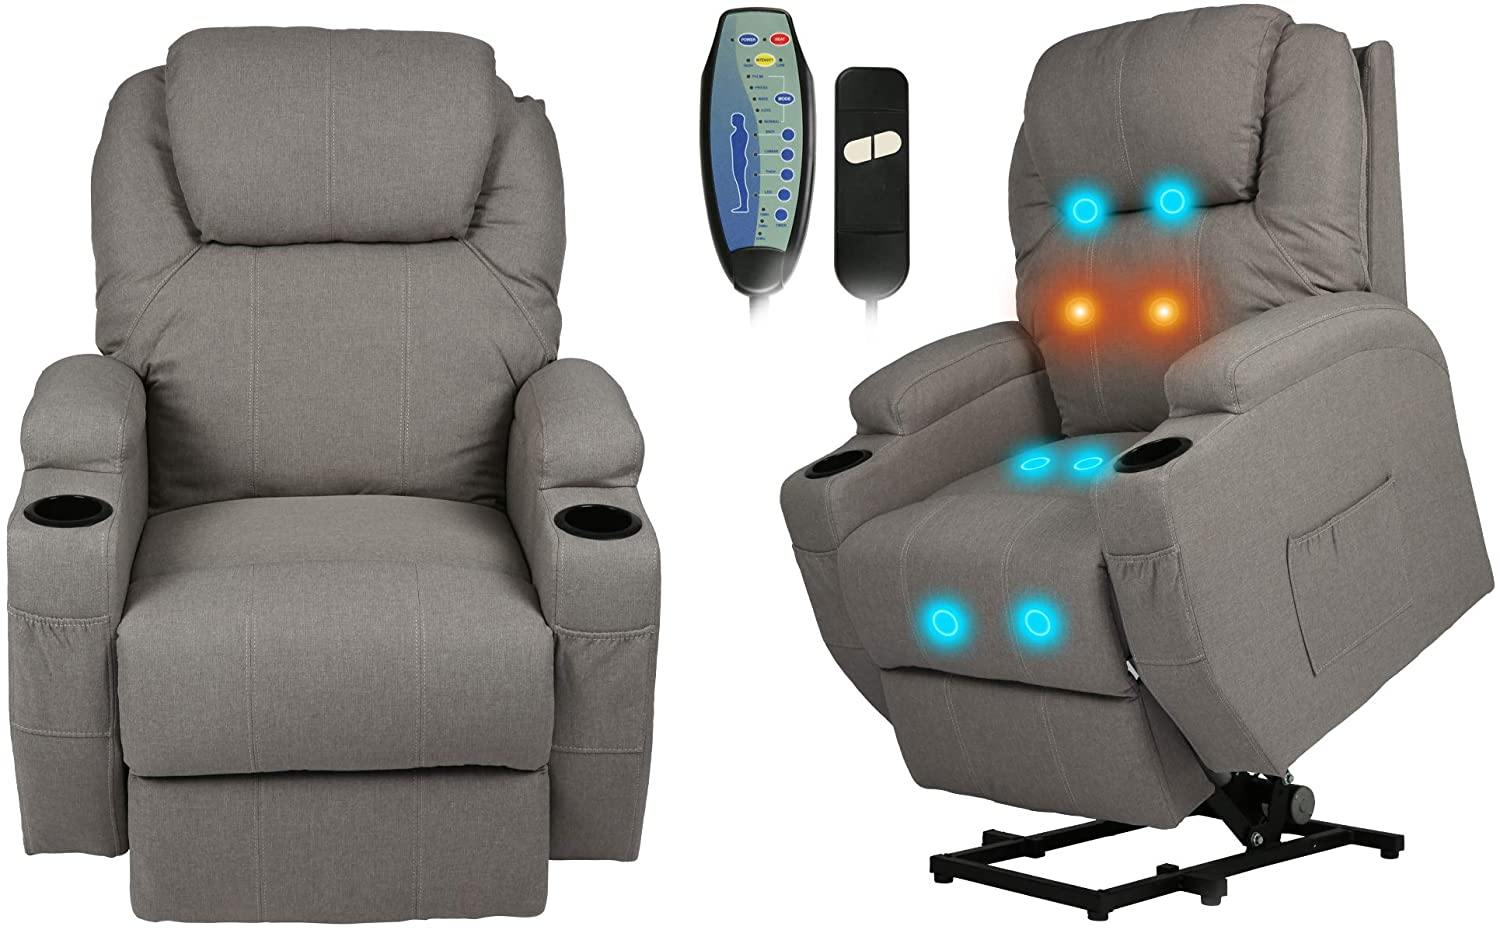 Single Recliner Chair with Massage & Heating Ergonomic Lounge Massage Sofa Power Lift with 2 Cup Holder Home Theater Seat, Fabric, Grey - Bosonshop